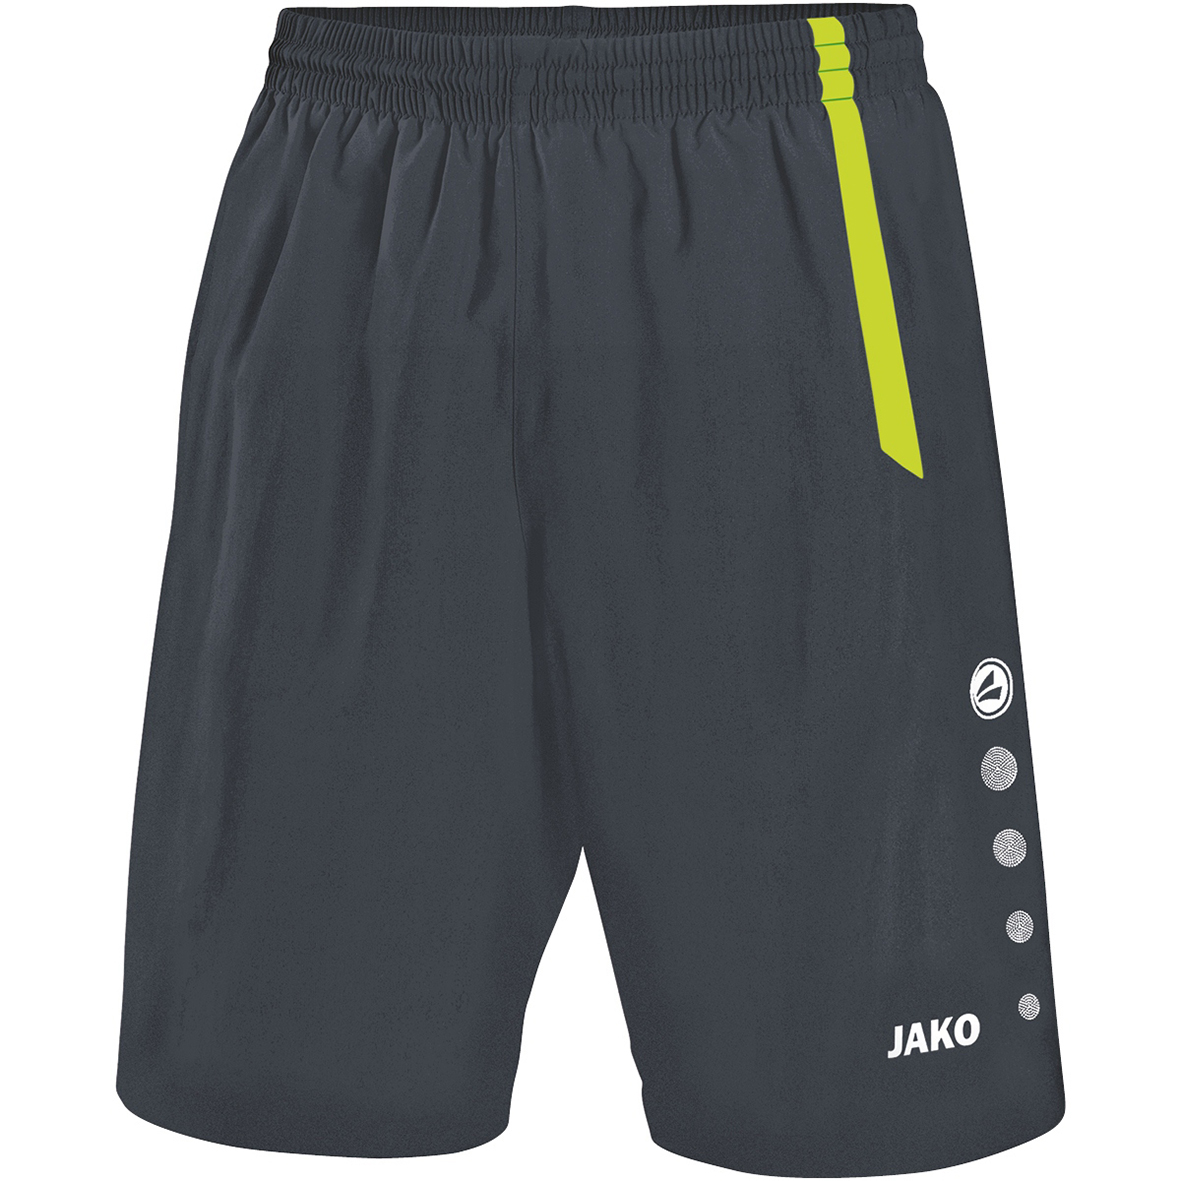 SHORTS JAKO TURIN, ANTHRACITE-LIME MEN.